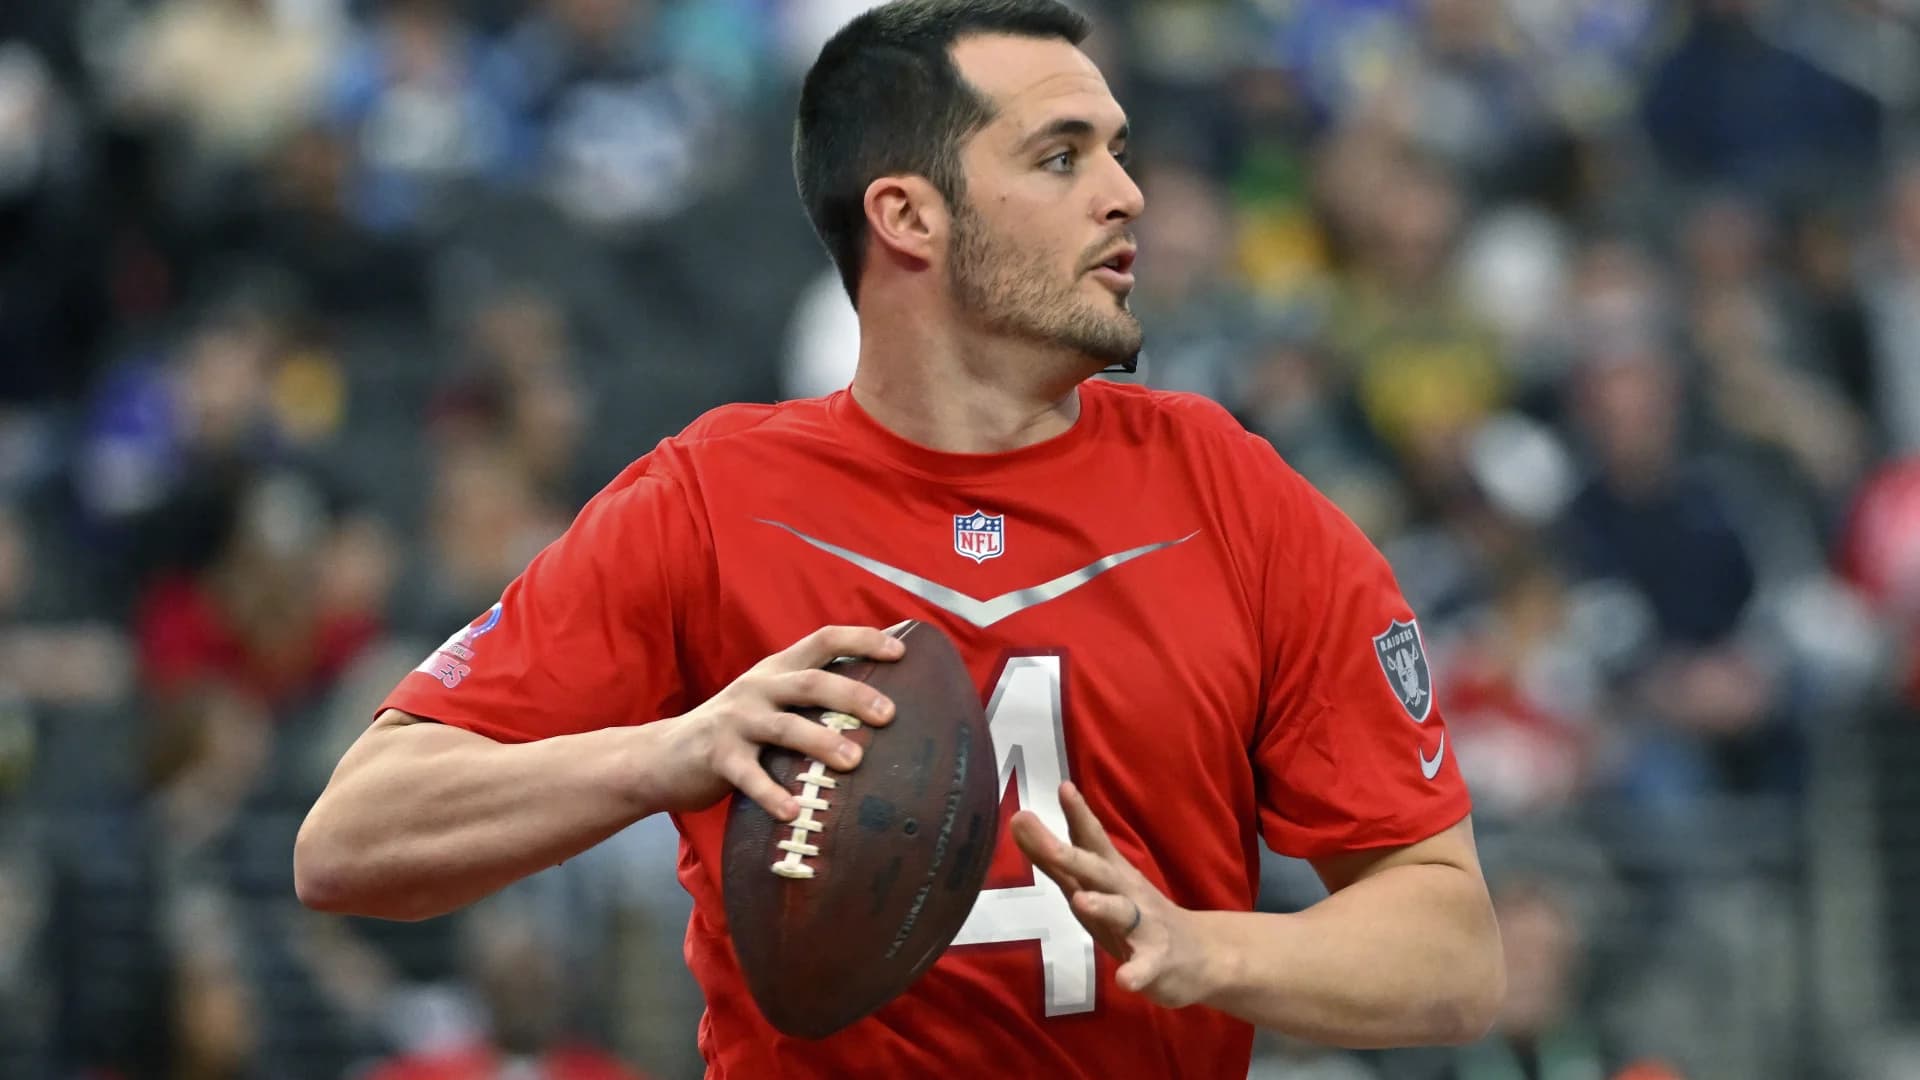 Ex-Raider Derek Carr agrees to 4-year contract with Saints